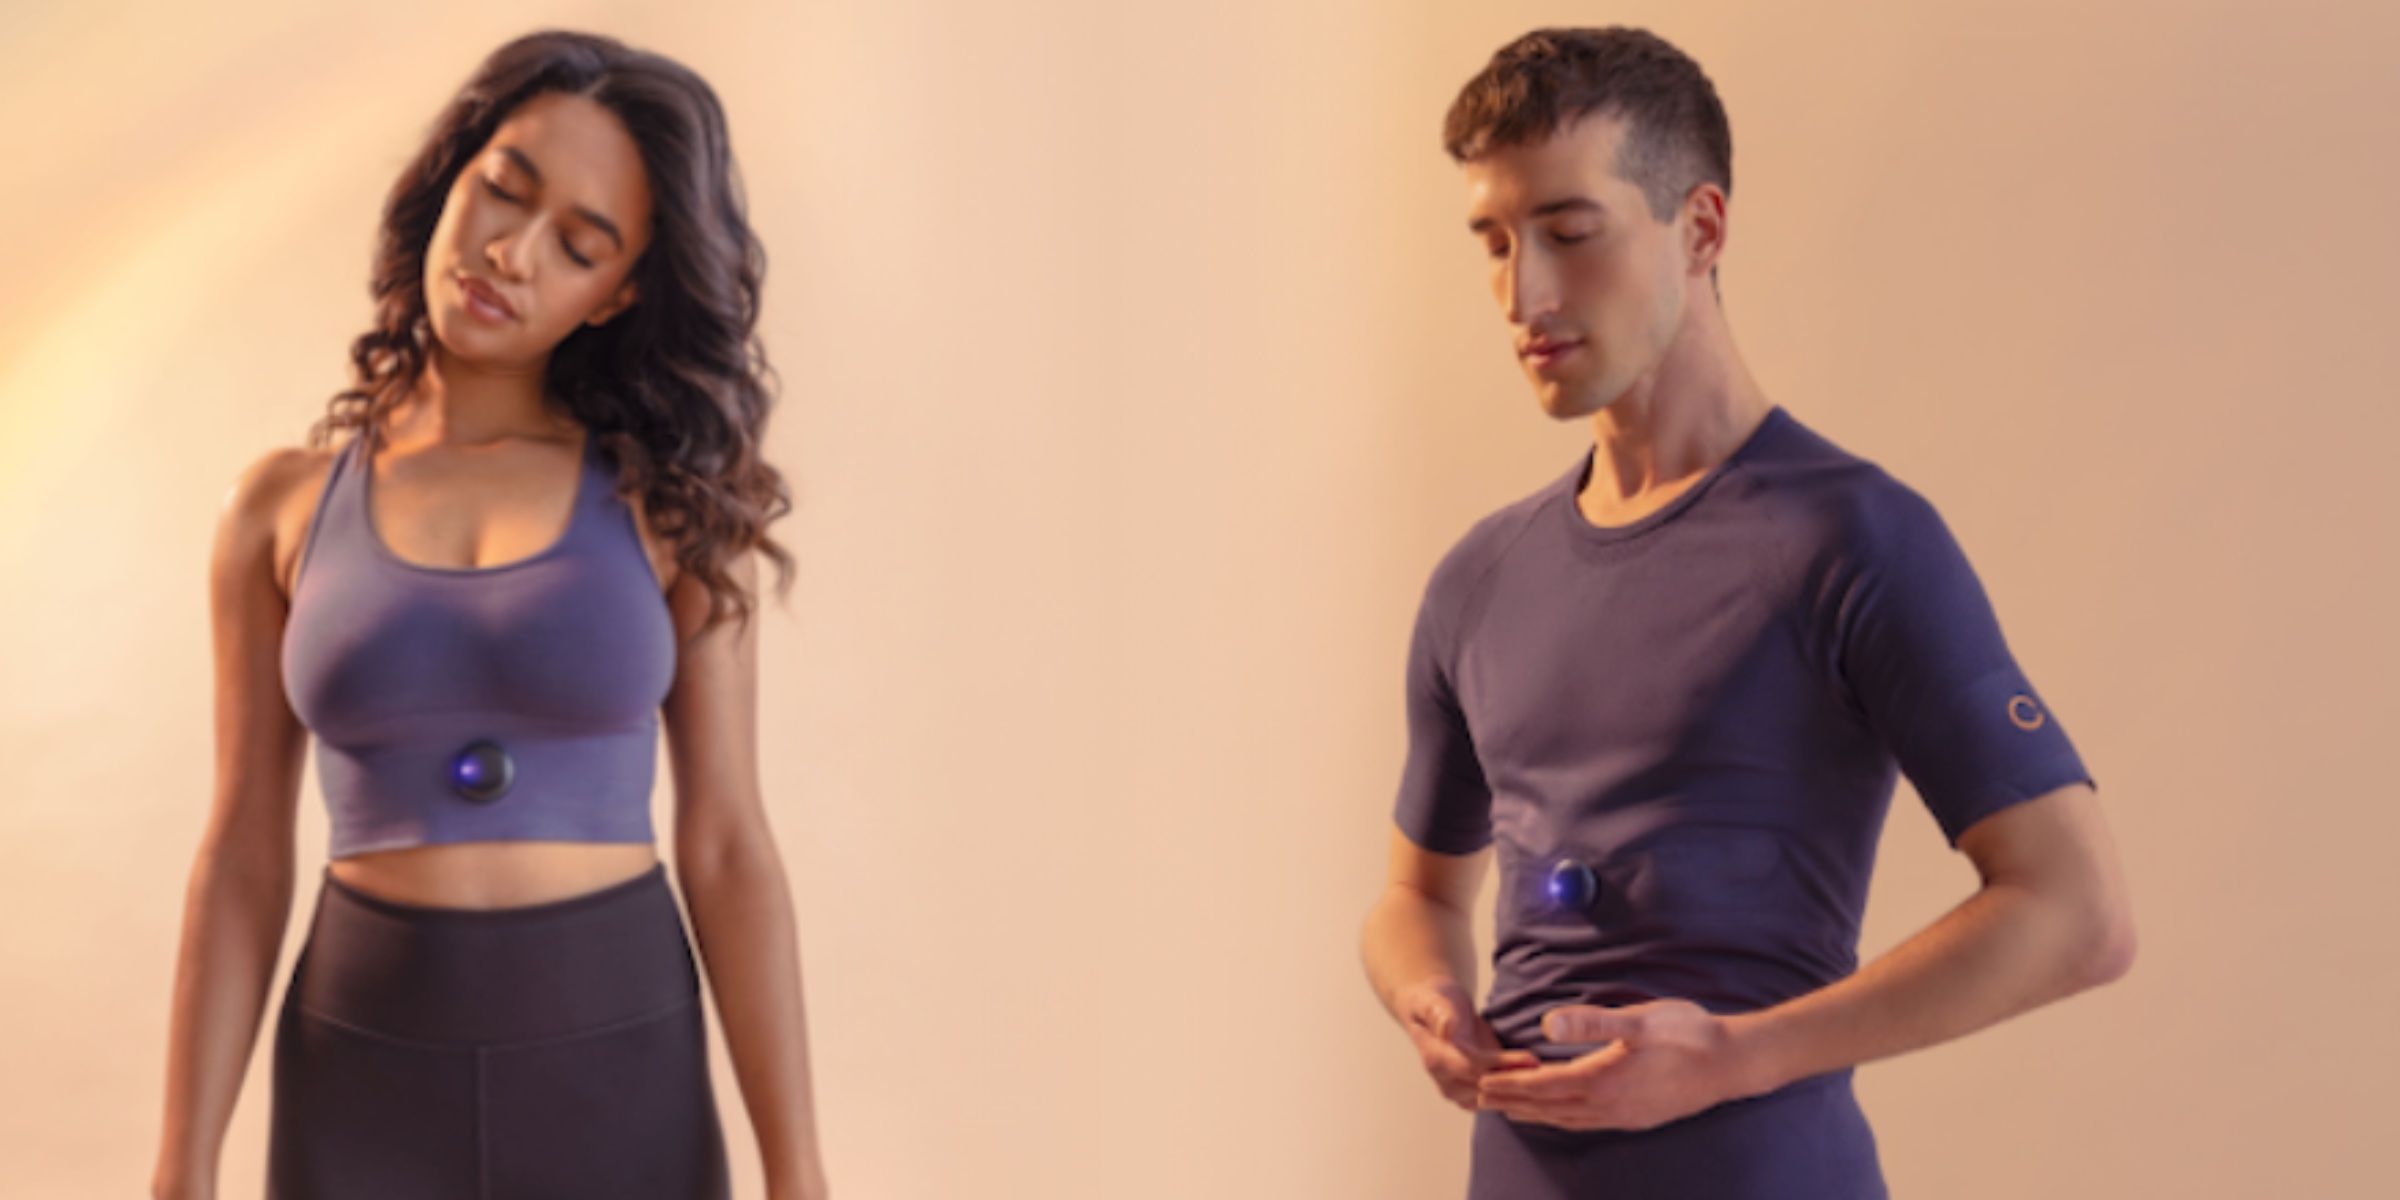 The Oxa Life Wearable sensor modeled on a man and woman wearing the accompanying shirt and sports bra.